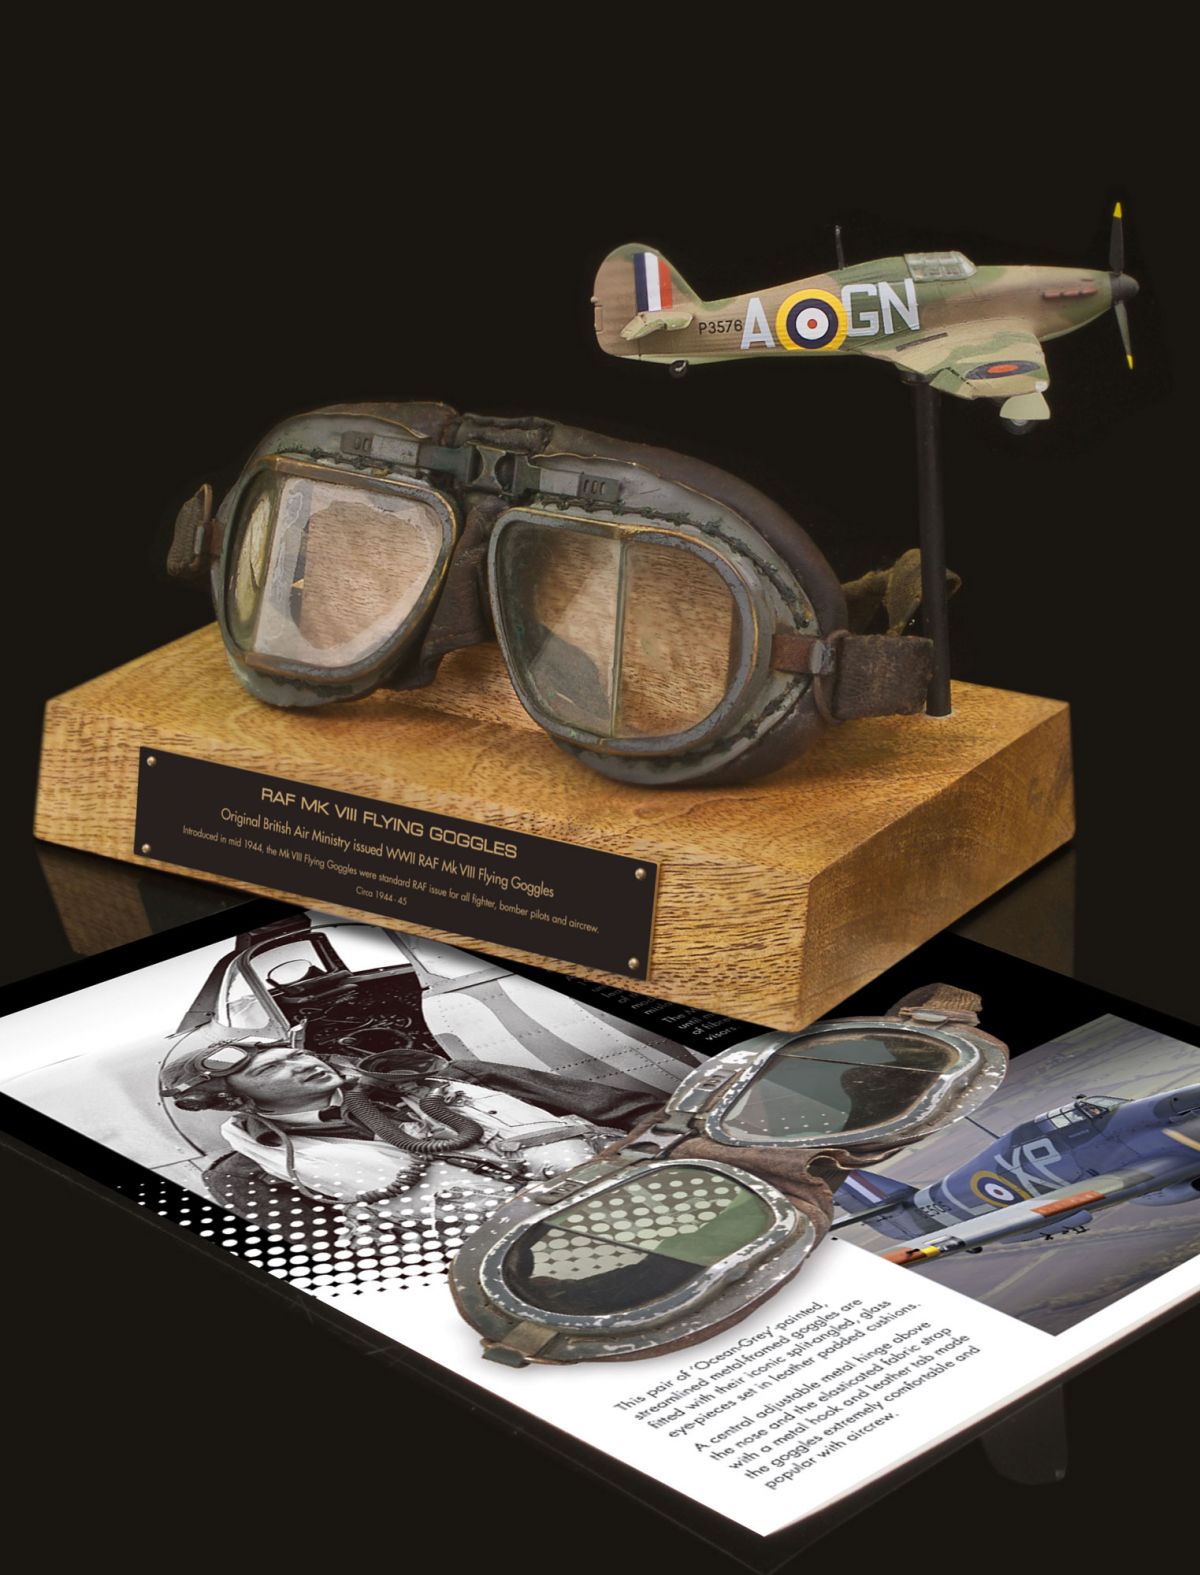 AIR MINISTRY ISSUED Mk VIII RAF FLYING GOGGLES